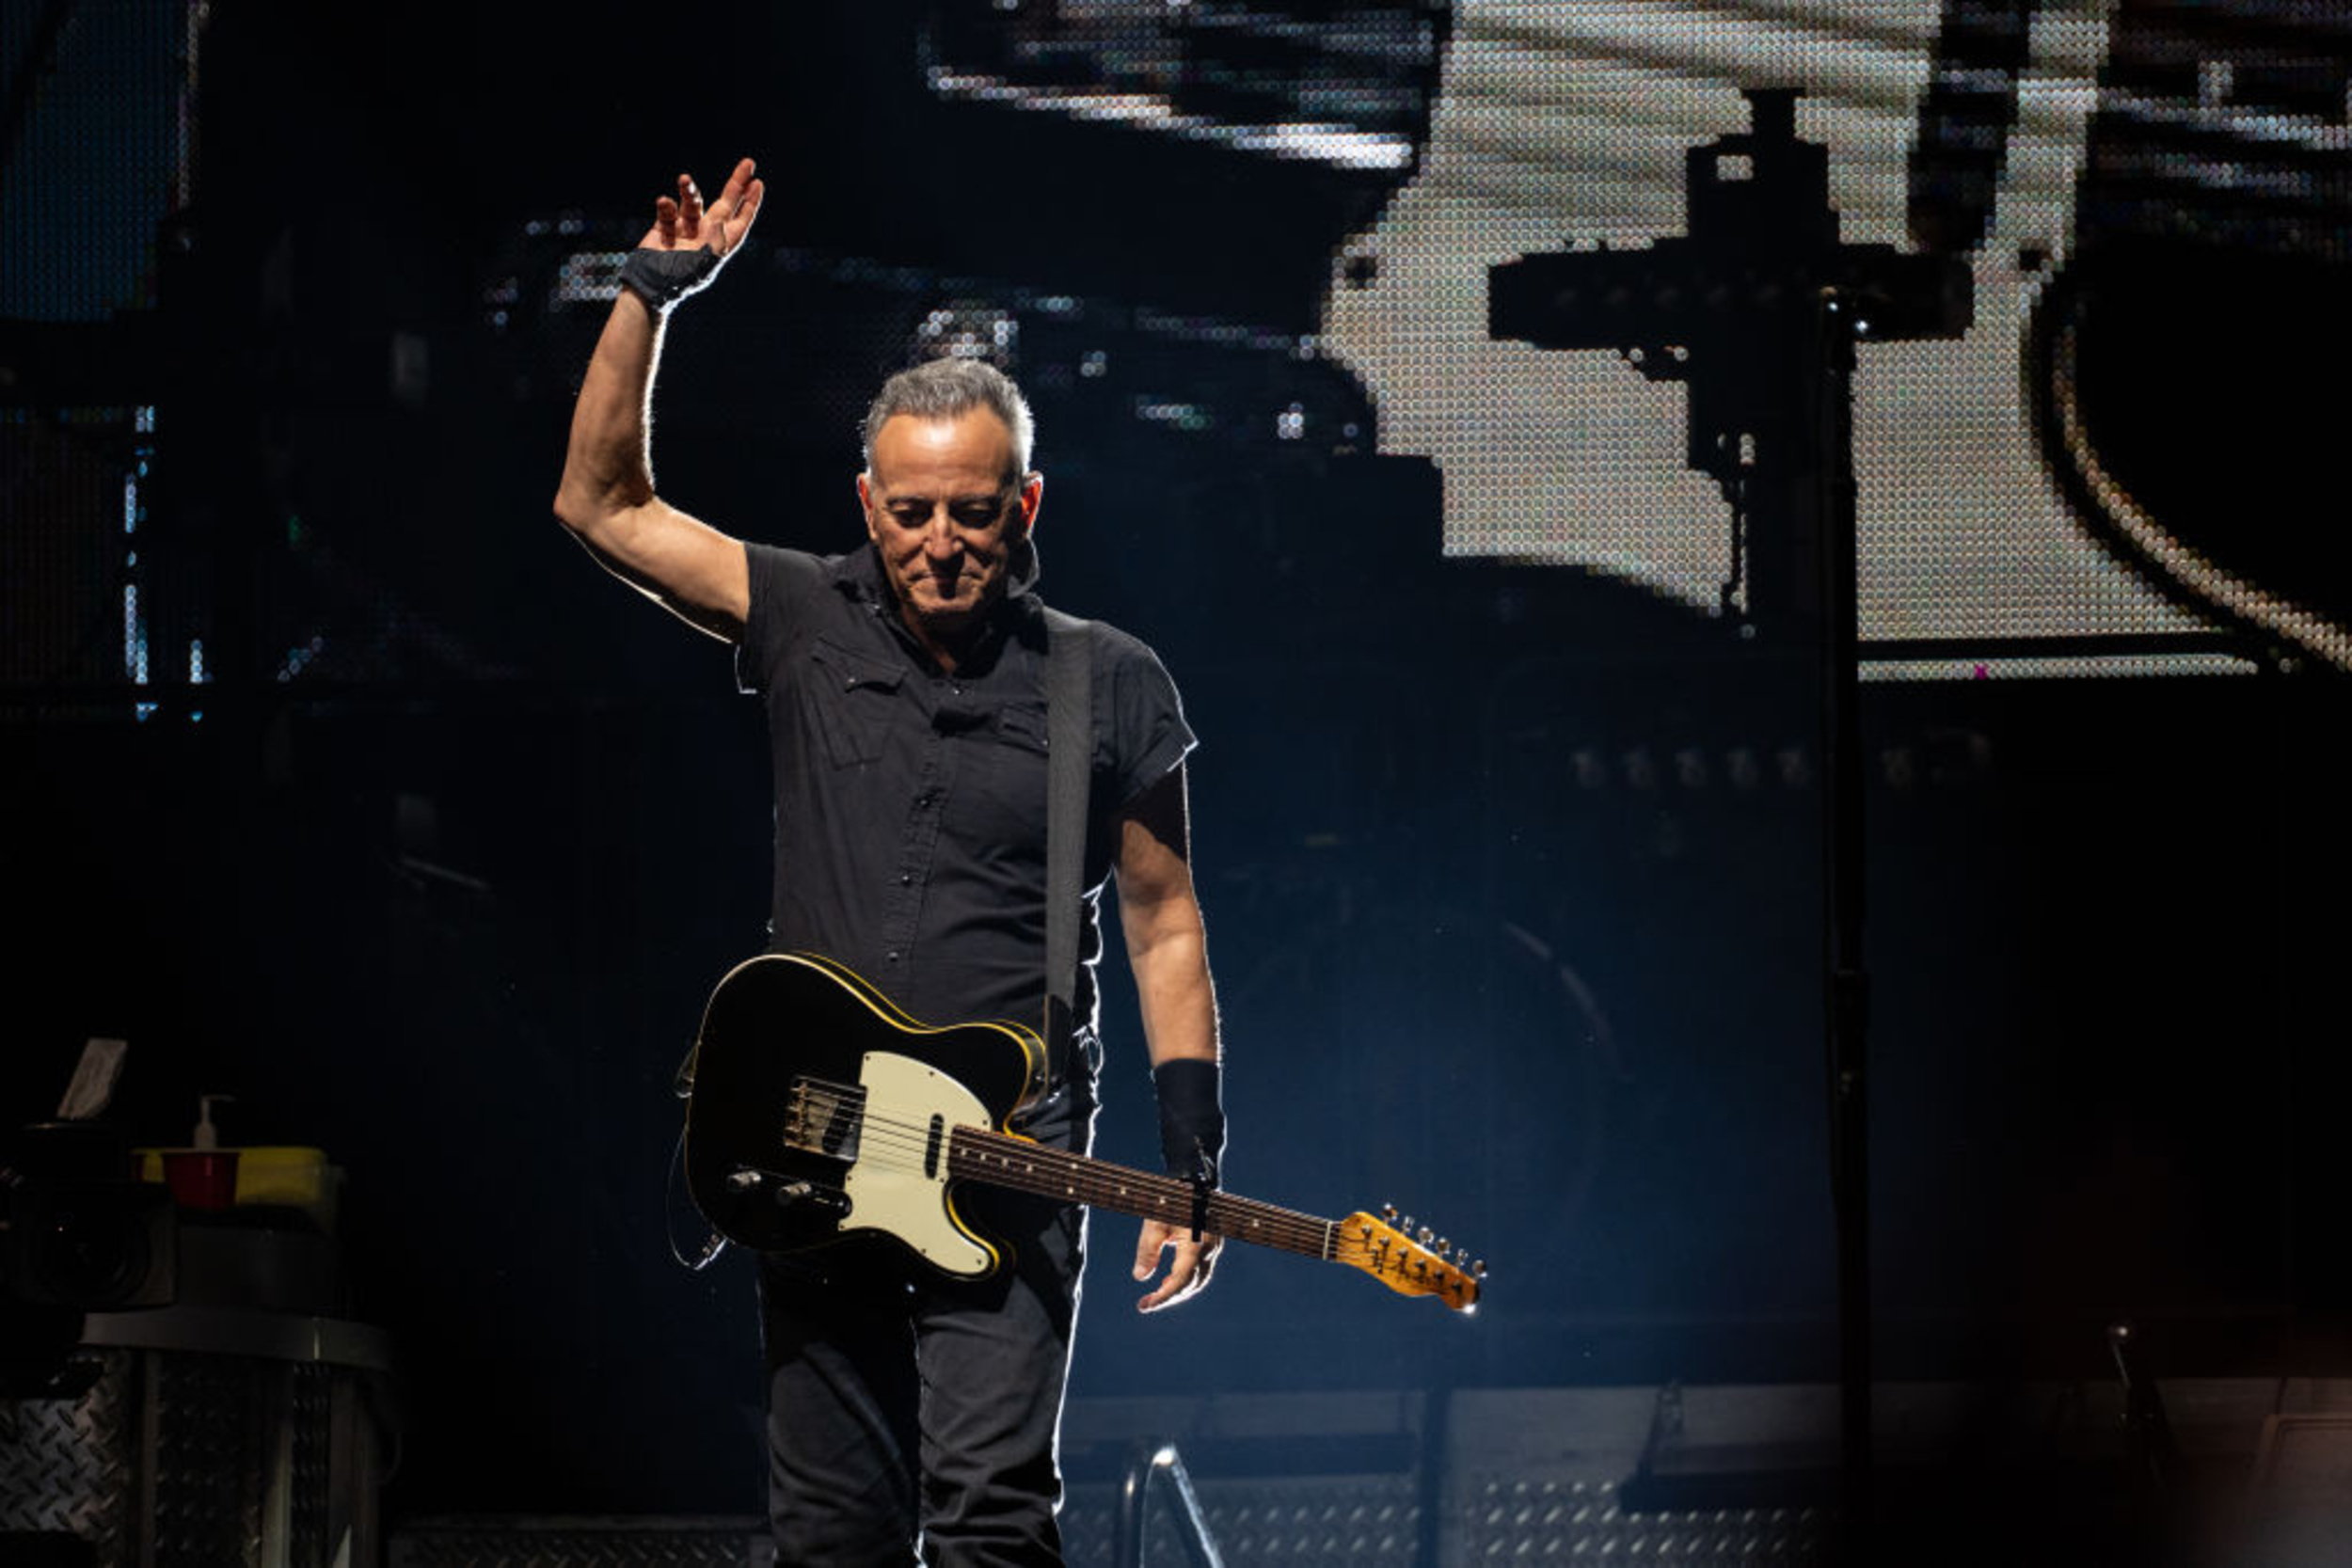 <p>Bruce Springsteen and the E Street Band postponed their 2023 tour after the singer had to treat a health matter, but the band is ready to take their show on the road this year. The tour is set to kick off on March 19th in Phoenix, Arizona, and other cities on the trek will include San Diego, Pittsburgh, Washington, D.C., and more. </p><p><a href='https://www.msn.com/en-us/community/channel/vid-cj9pqbr0vn9in2b6ddcd8sfgpfq6x6utp44fssrv6mc2gtybw0us'>Follow us on MSN to see more of our exclusive entertainment content.</a></p>